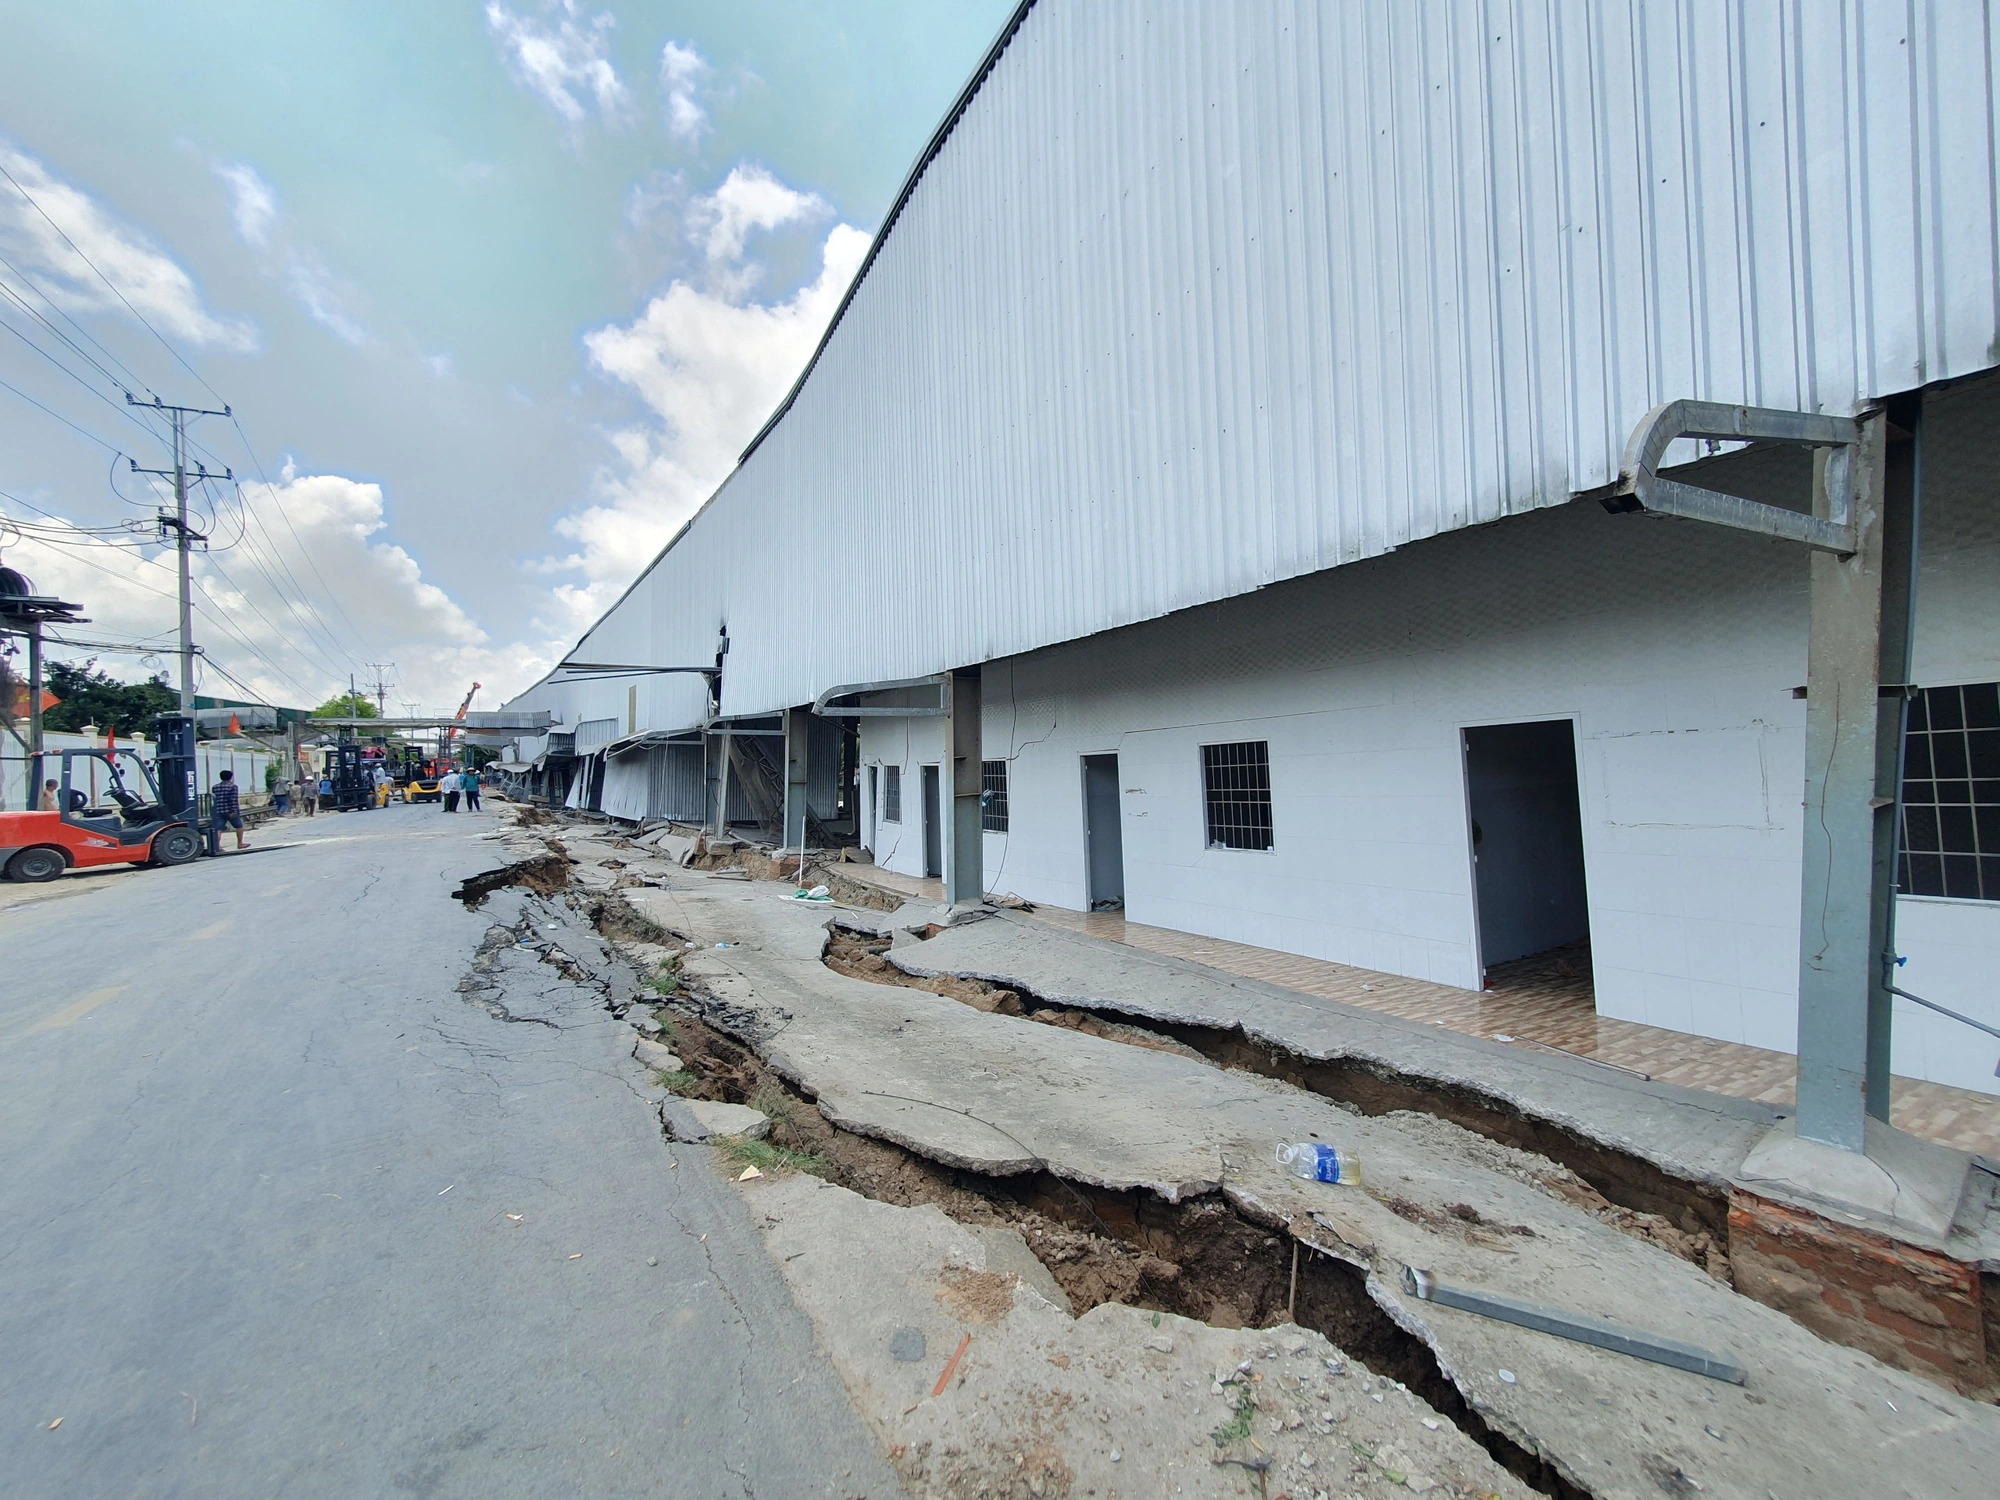 Land subsidence strikes food warehouse in southern Vietnam, causing losses of over $392,000